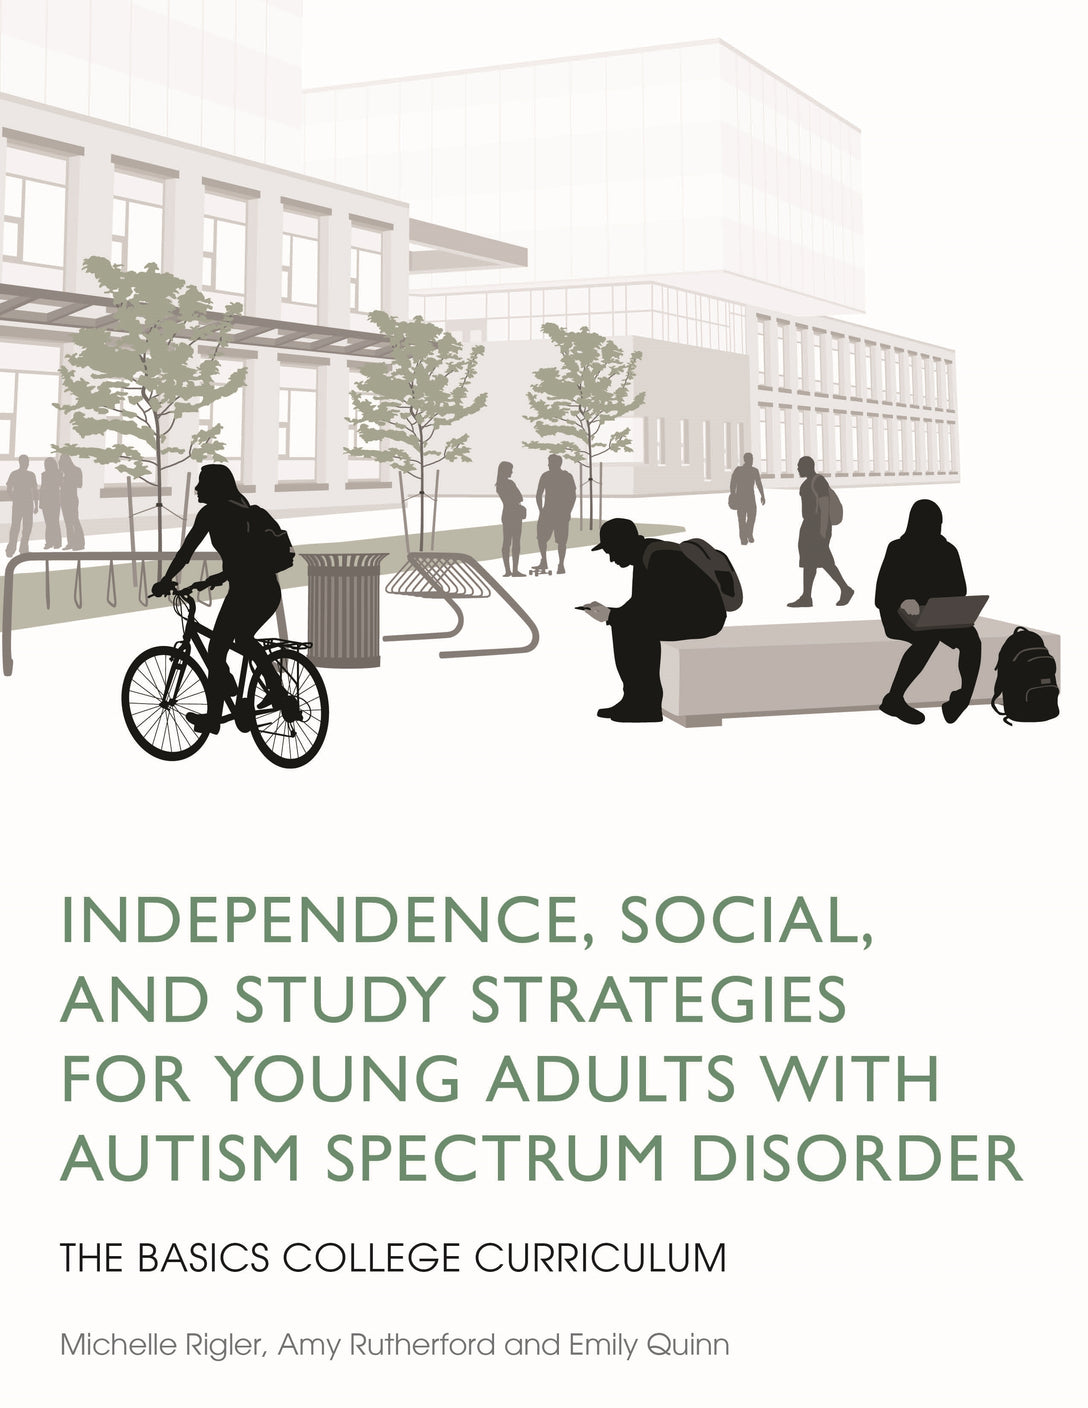 Independence, Social, and Study Strategies for Young Adults with Autism Spectrum Disorder by Amy Rutherford, Michelle Rigler, Emily Quinn